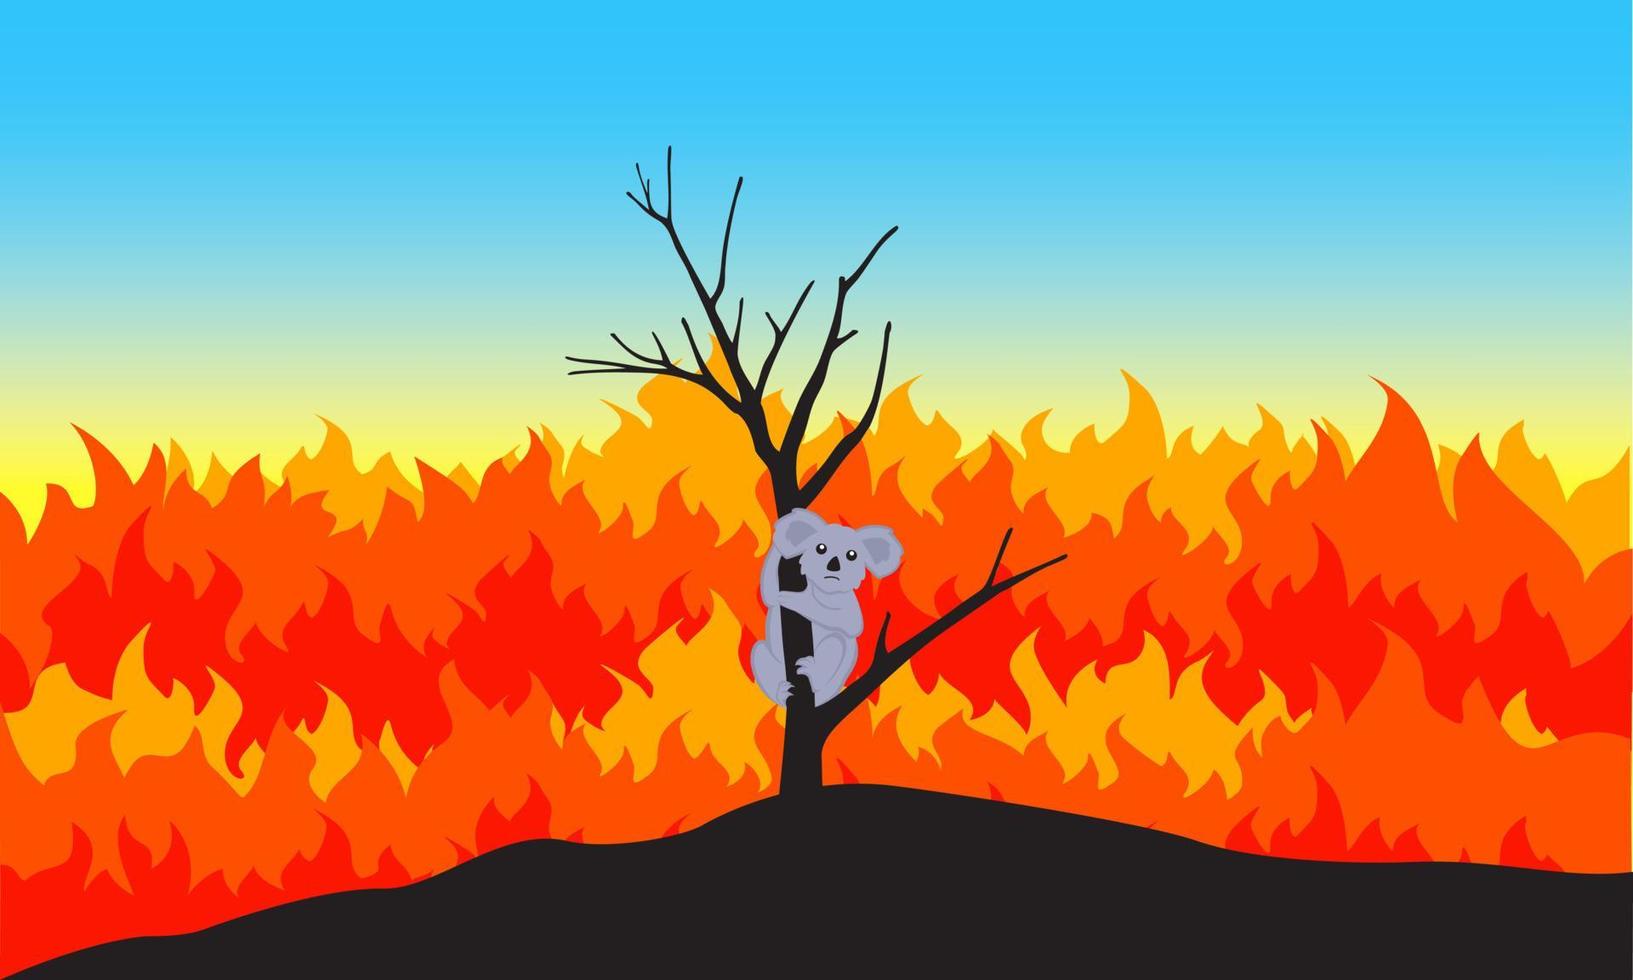 koala climbs a tree caught in a forest fire. graphic design illustration. vector